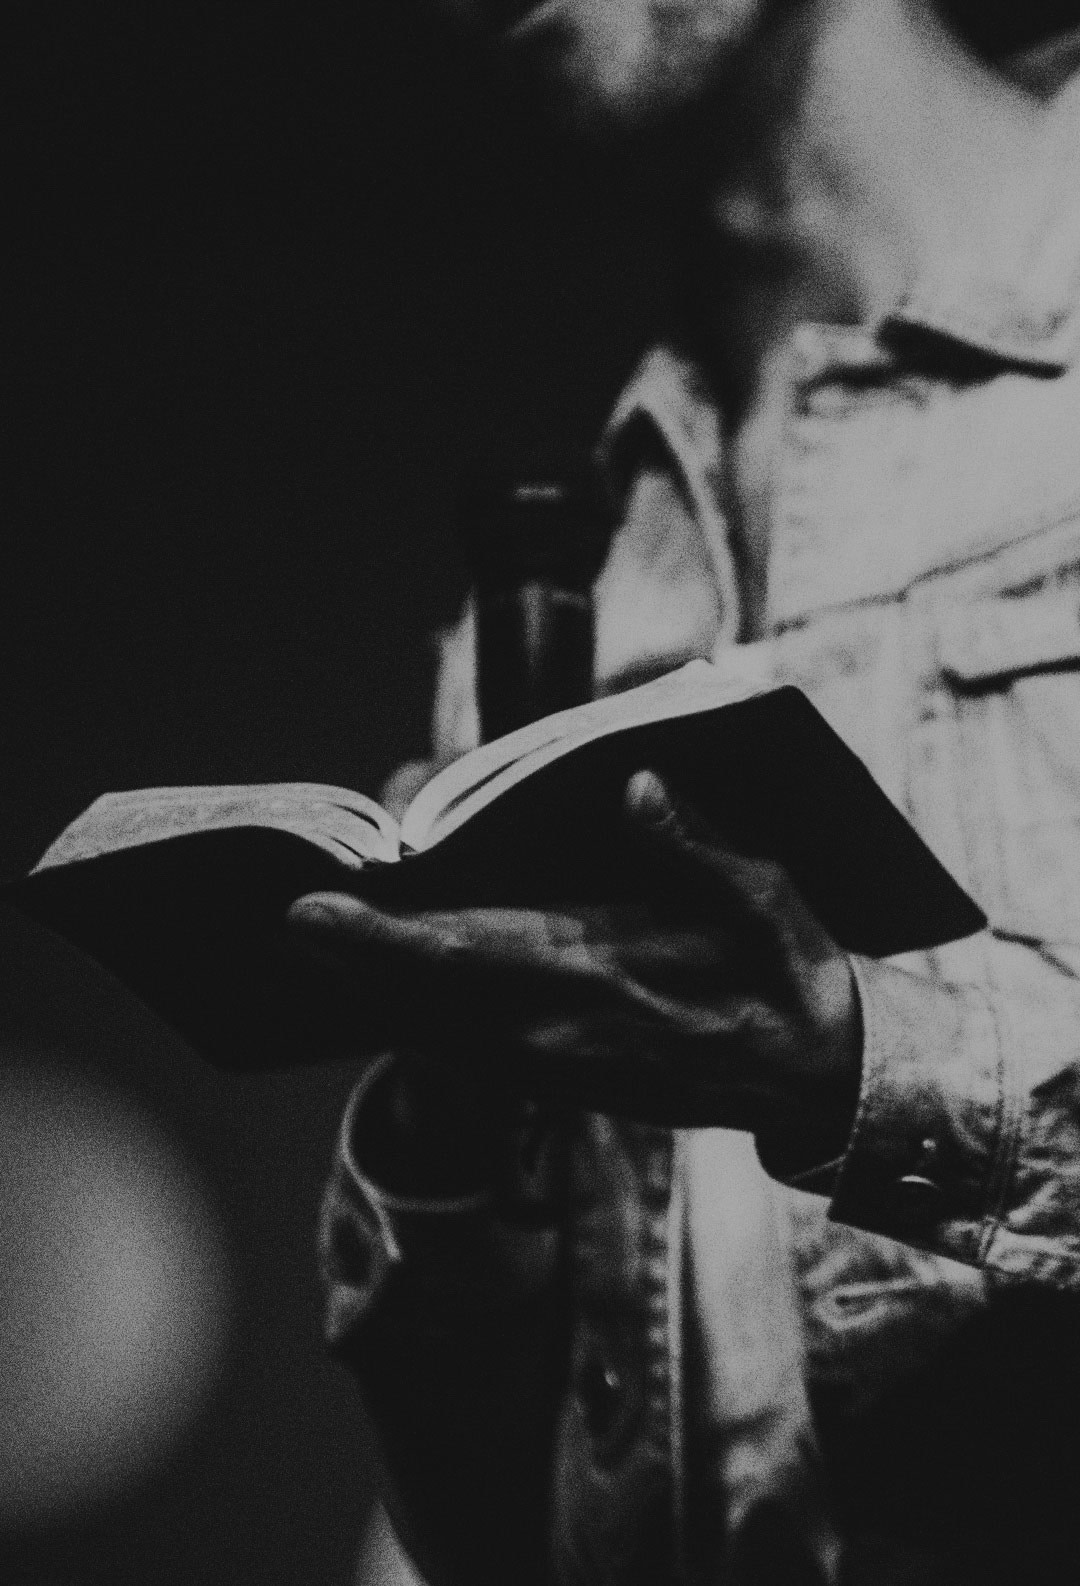 Person holding a Bible